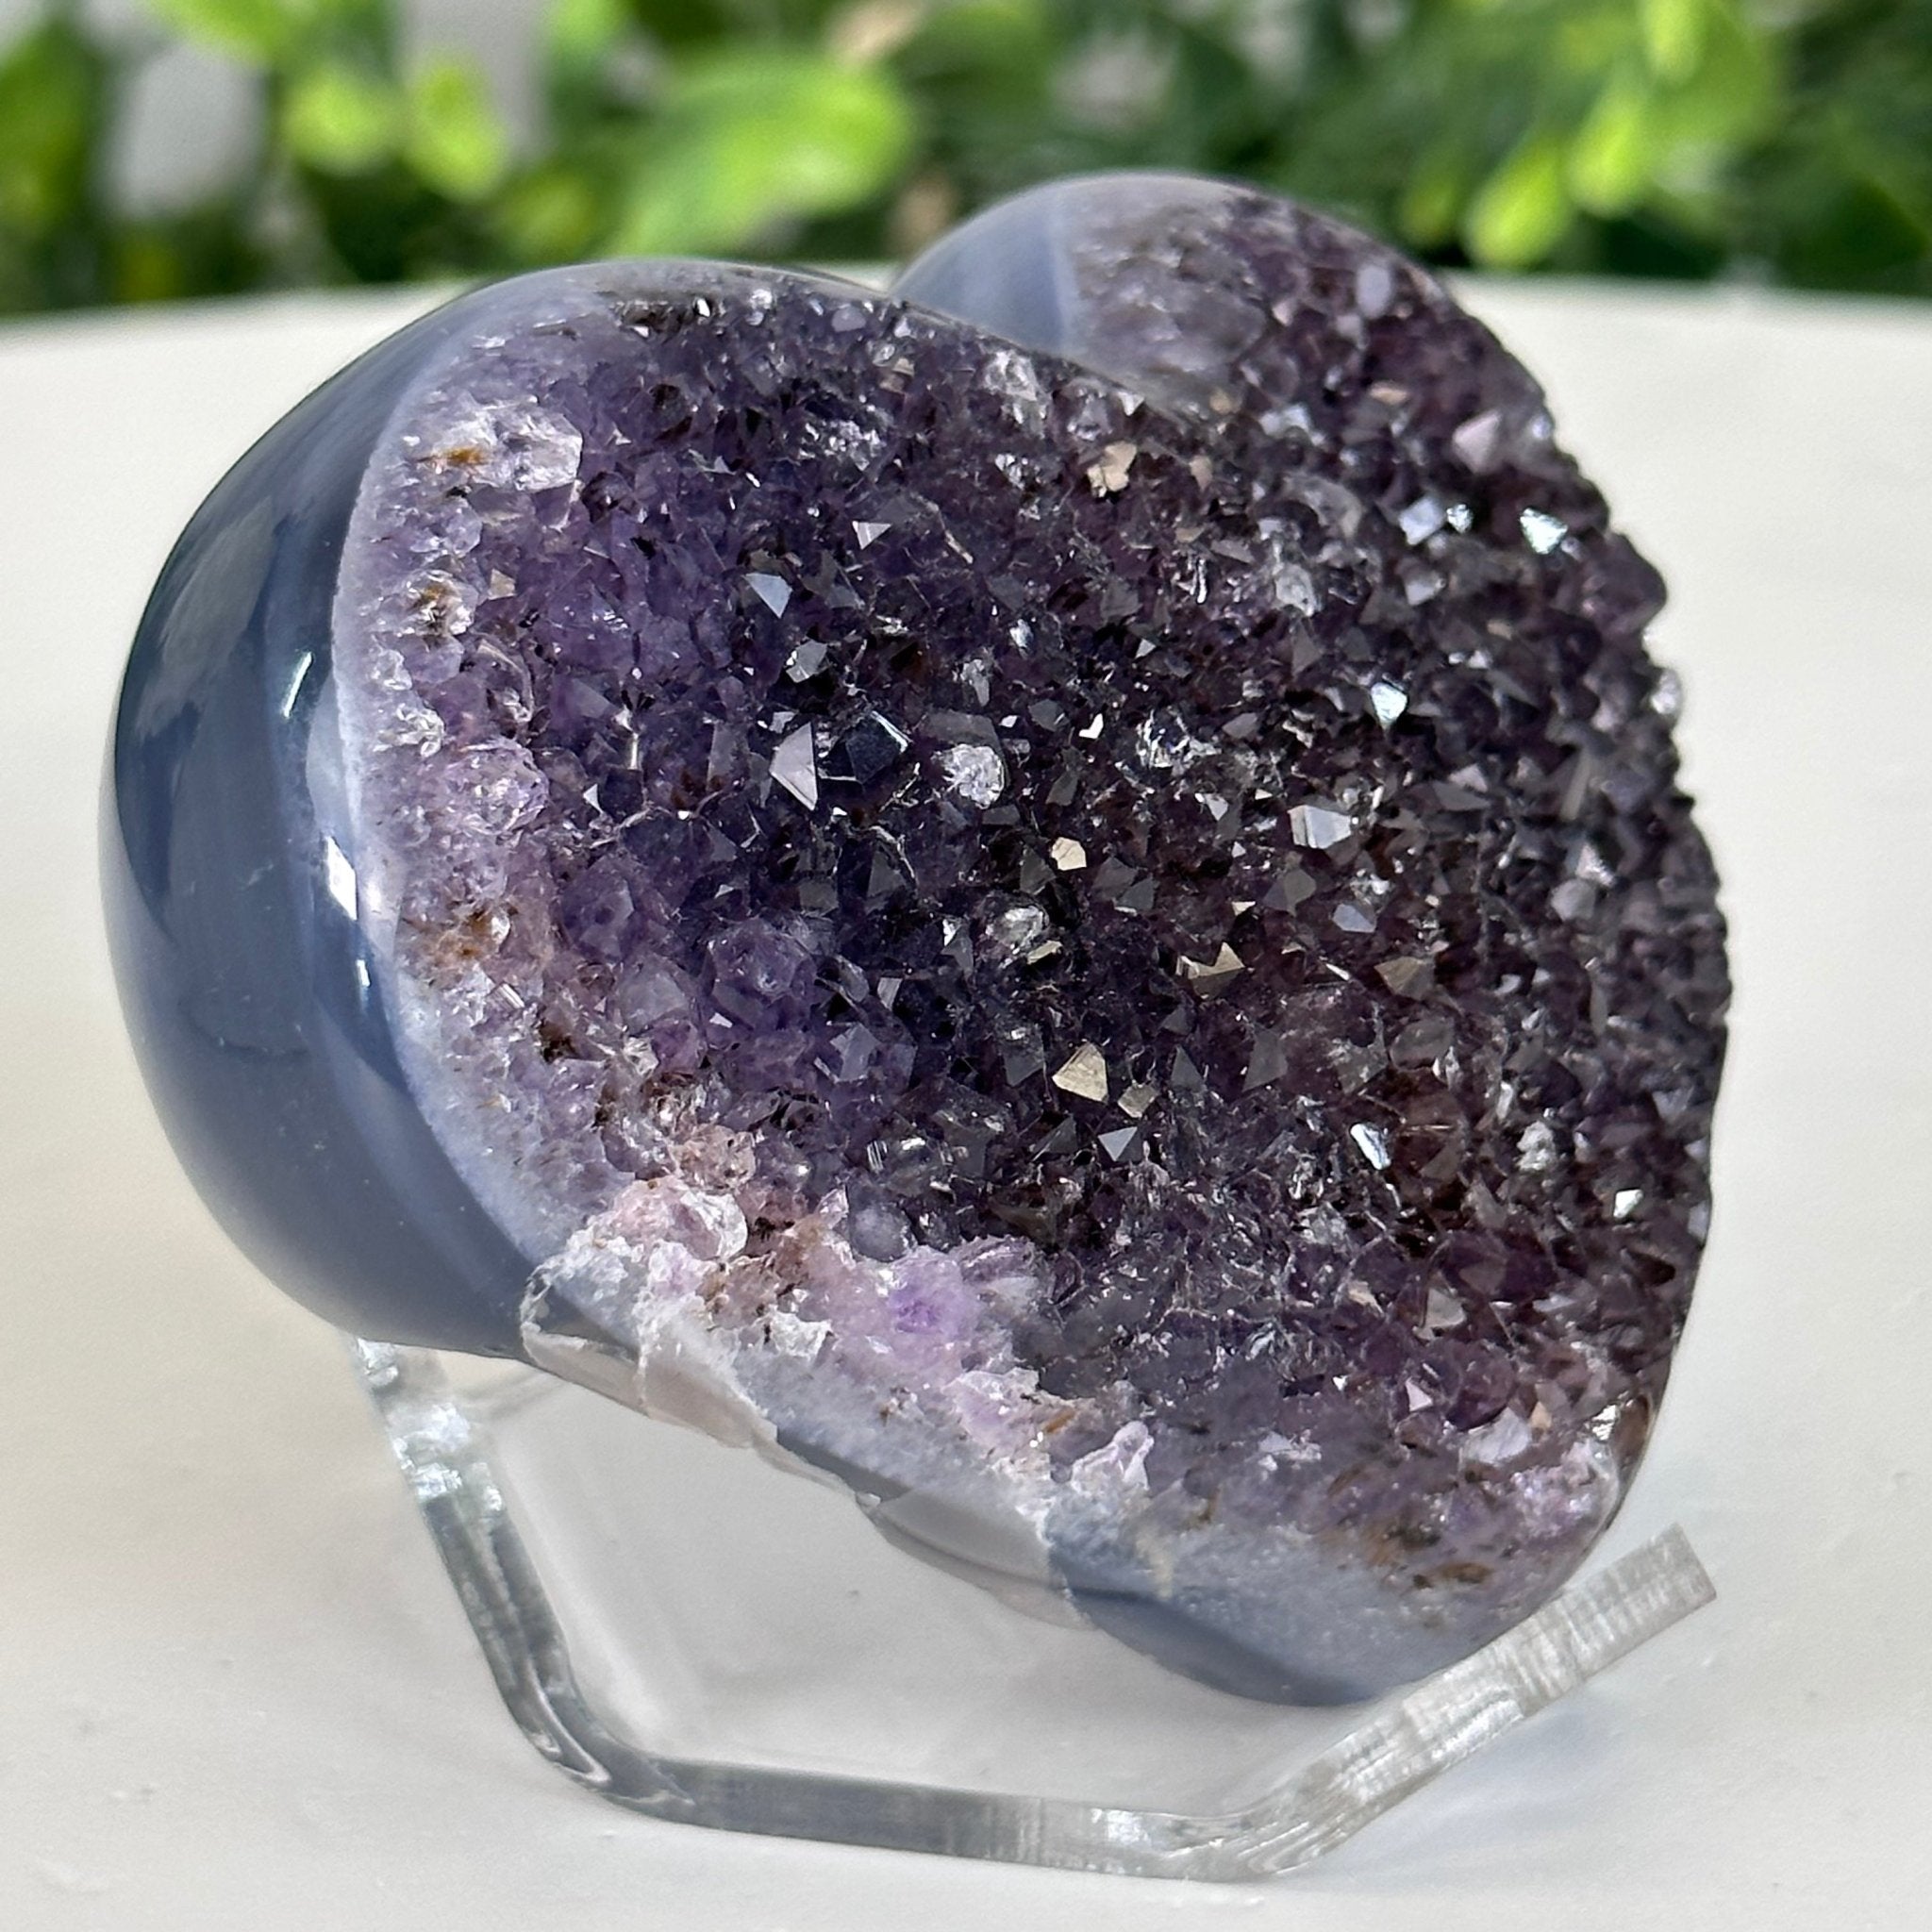 Extra Quality Amethyst Heart Geode on an Acrylic Stand, 0.48 lbs & 2.3" Tall #5462-0037 by Brazil Gems - Brazil GemsBrazil GemsExtra Quality Amethyst Heart Geode on an Acrylic Stand, 0.48 lbs & 2.3" Tall #5462-0037 by Brazil GemsHearts5462-0037